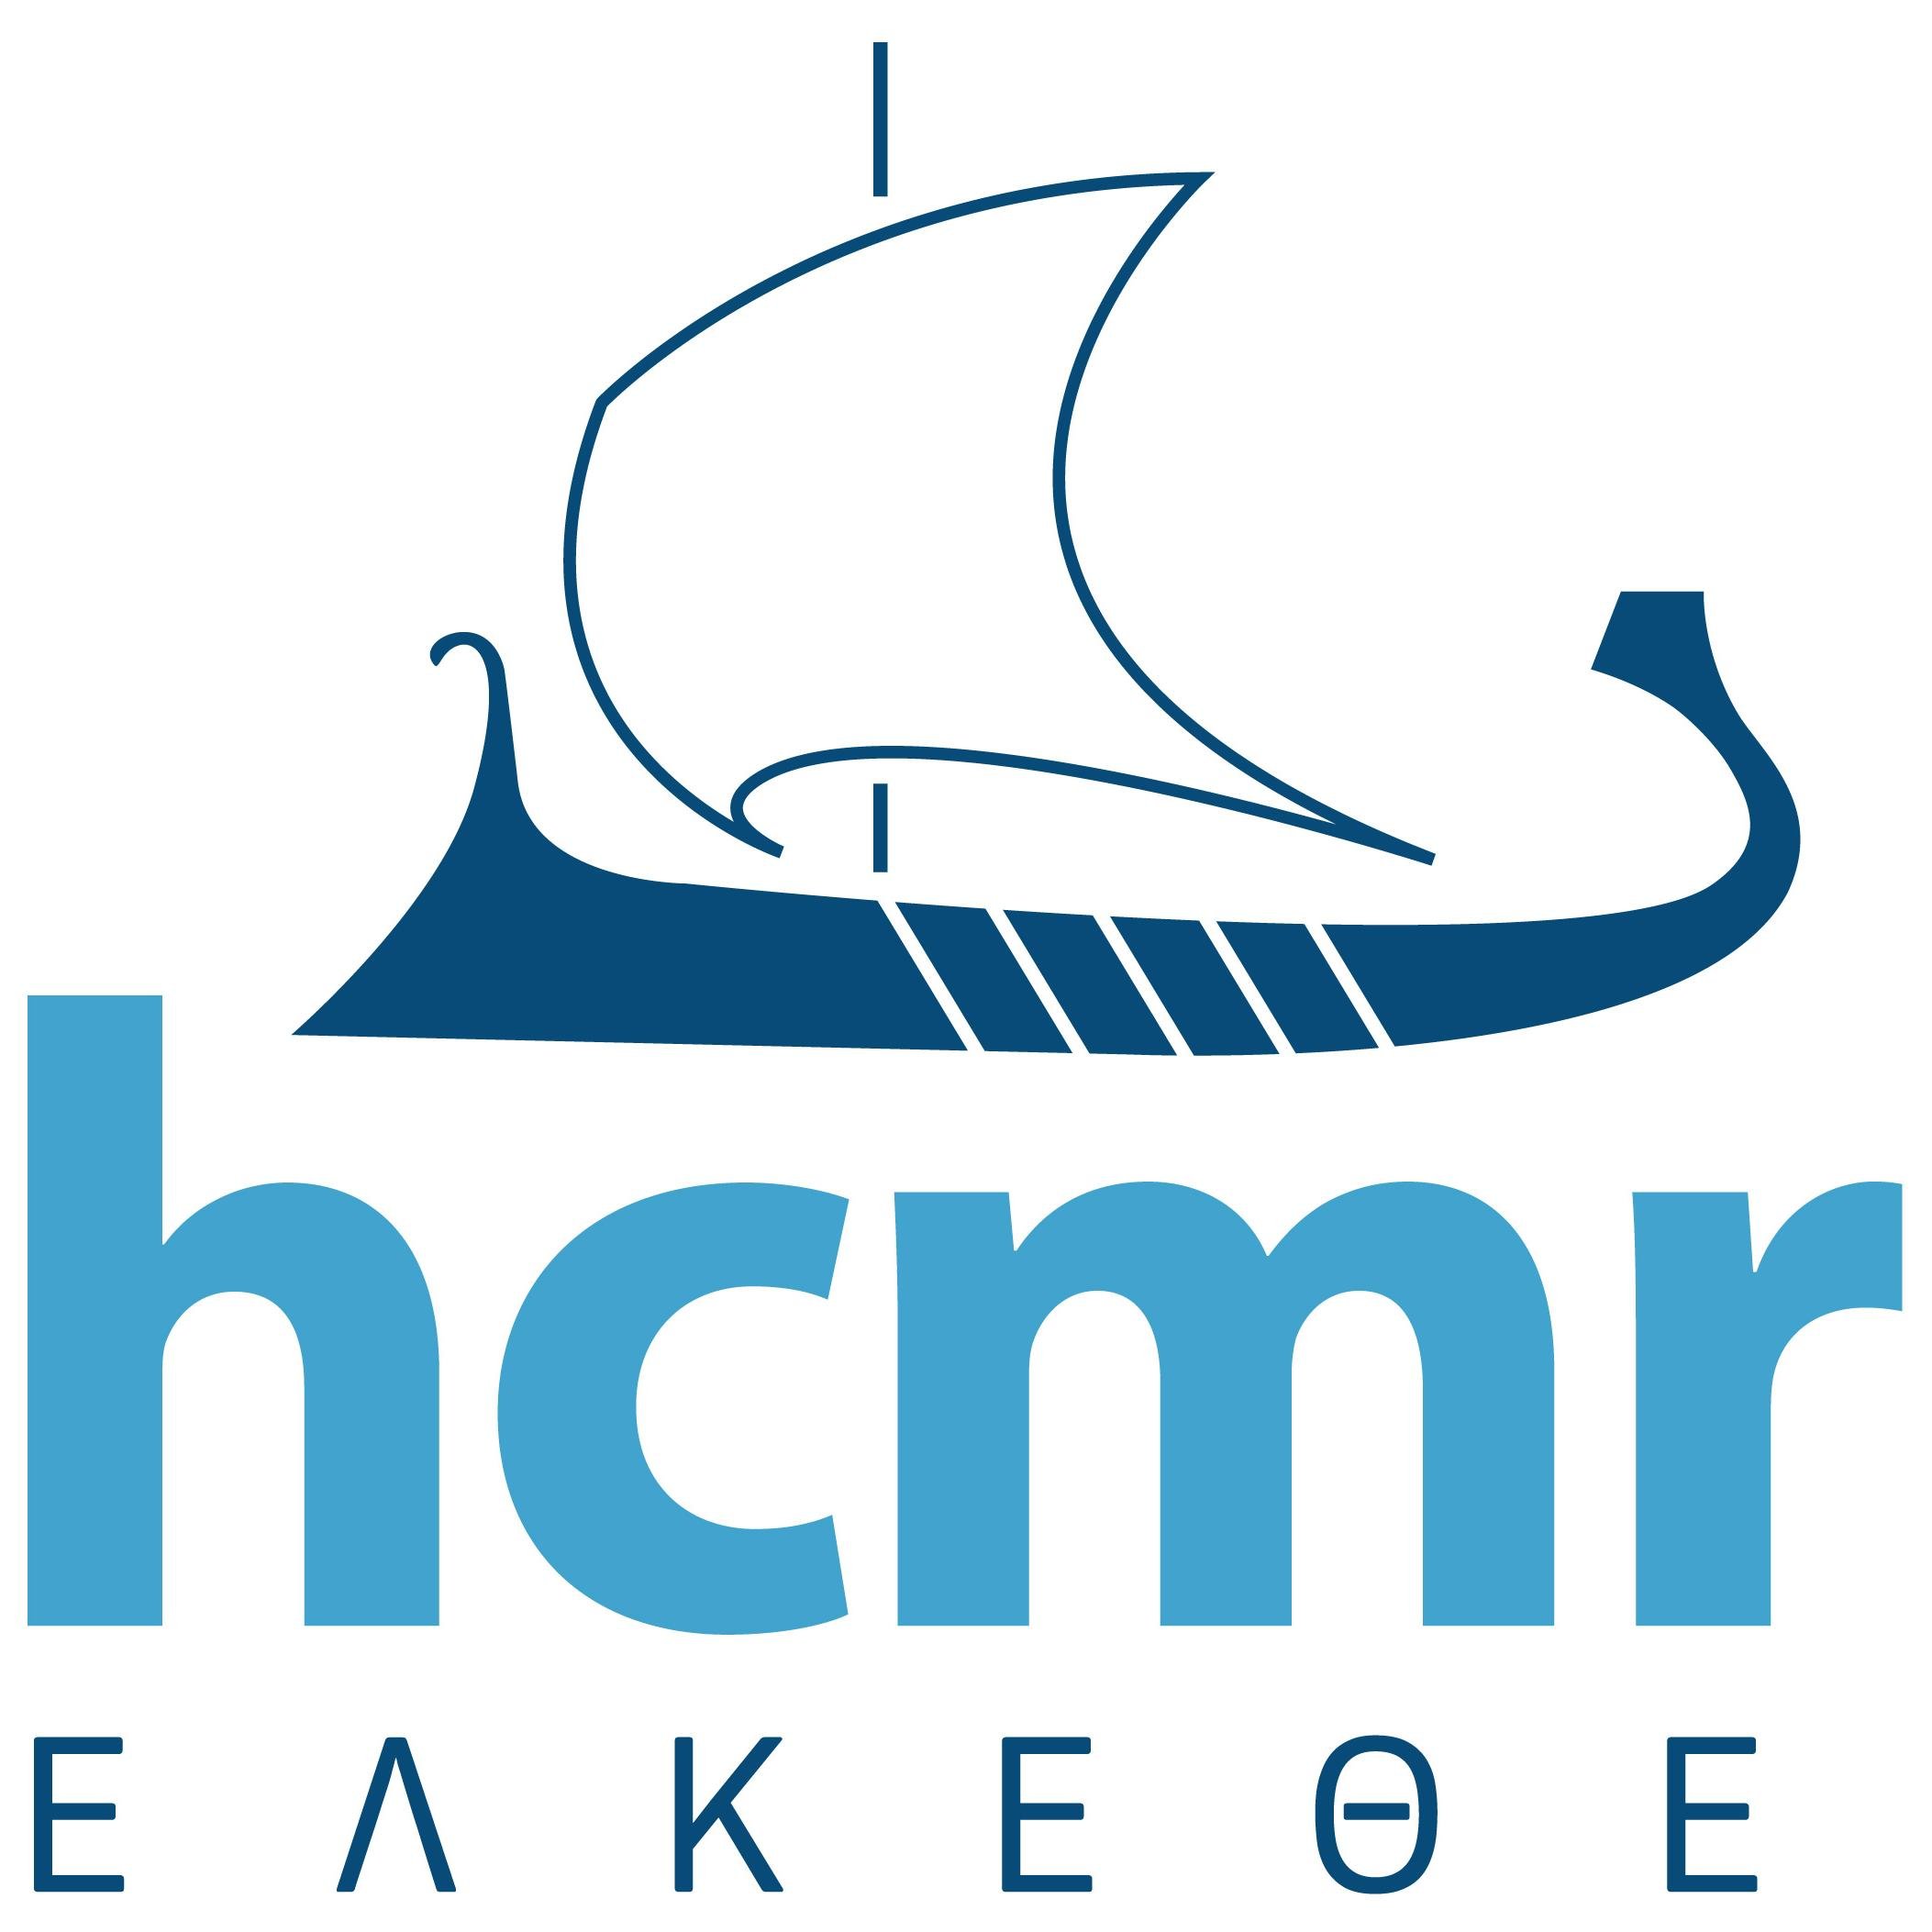 The Hellenic Centre for Marine Research is the national laboratory of Greece for oceanography and marine research.